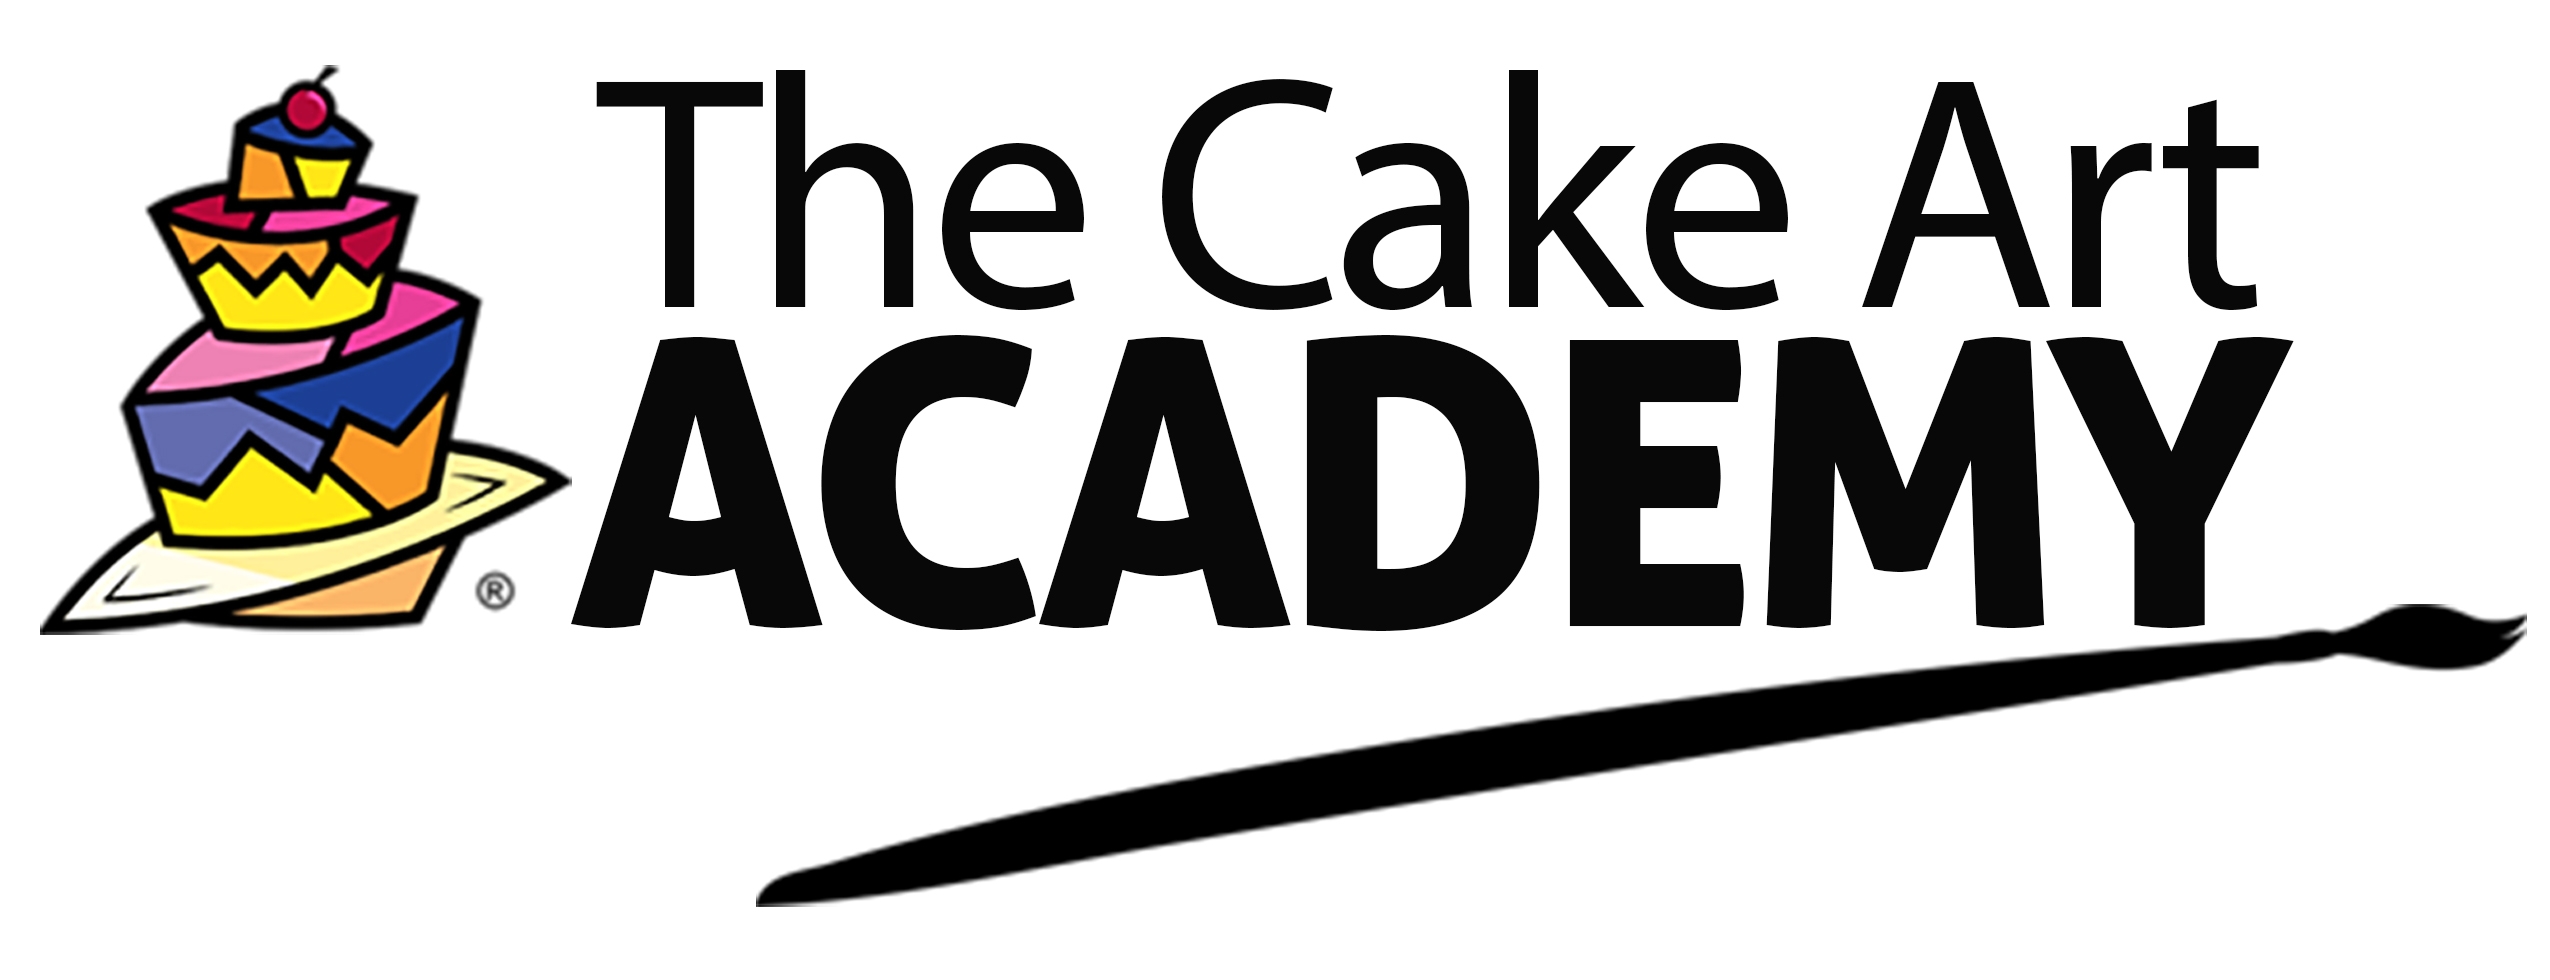 The Cake Art Academy - The best baking courses